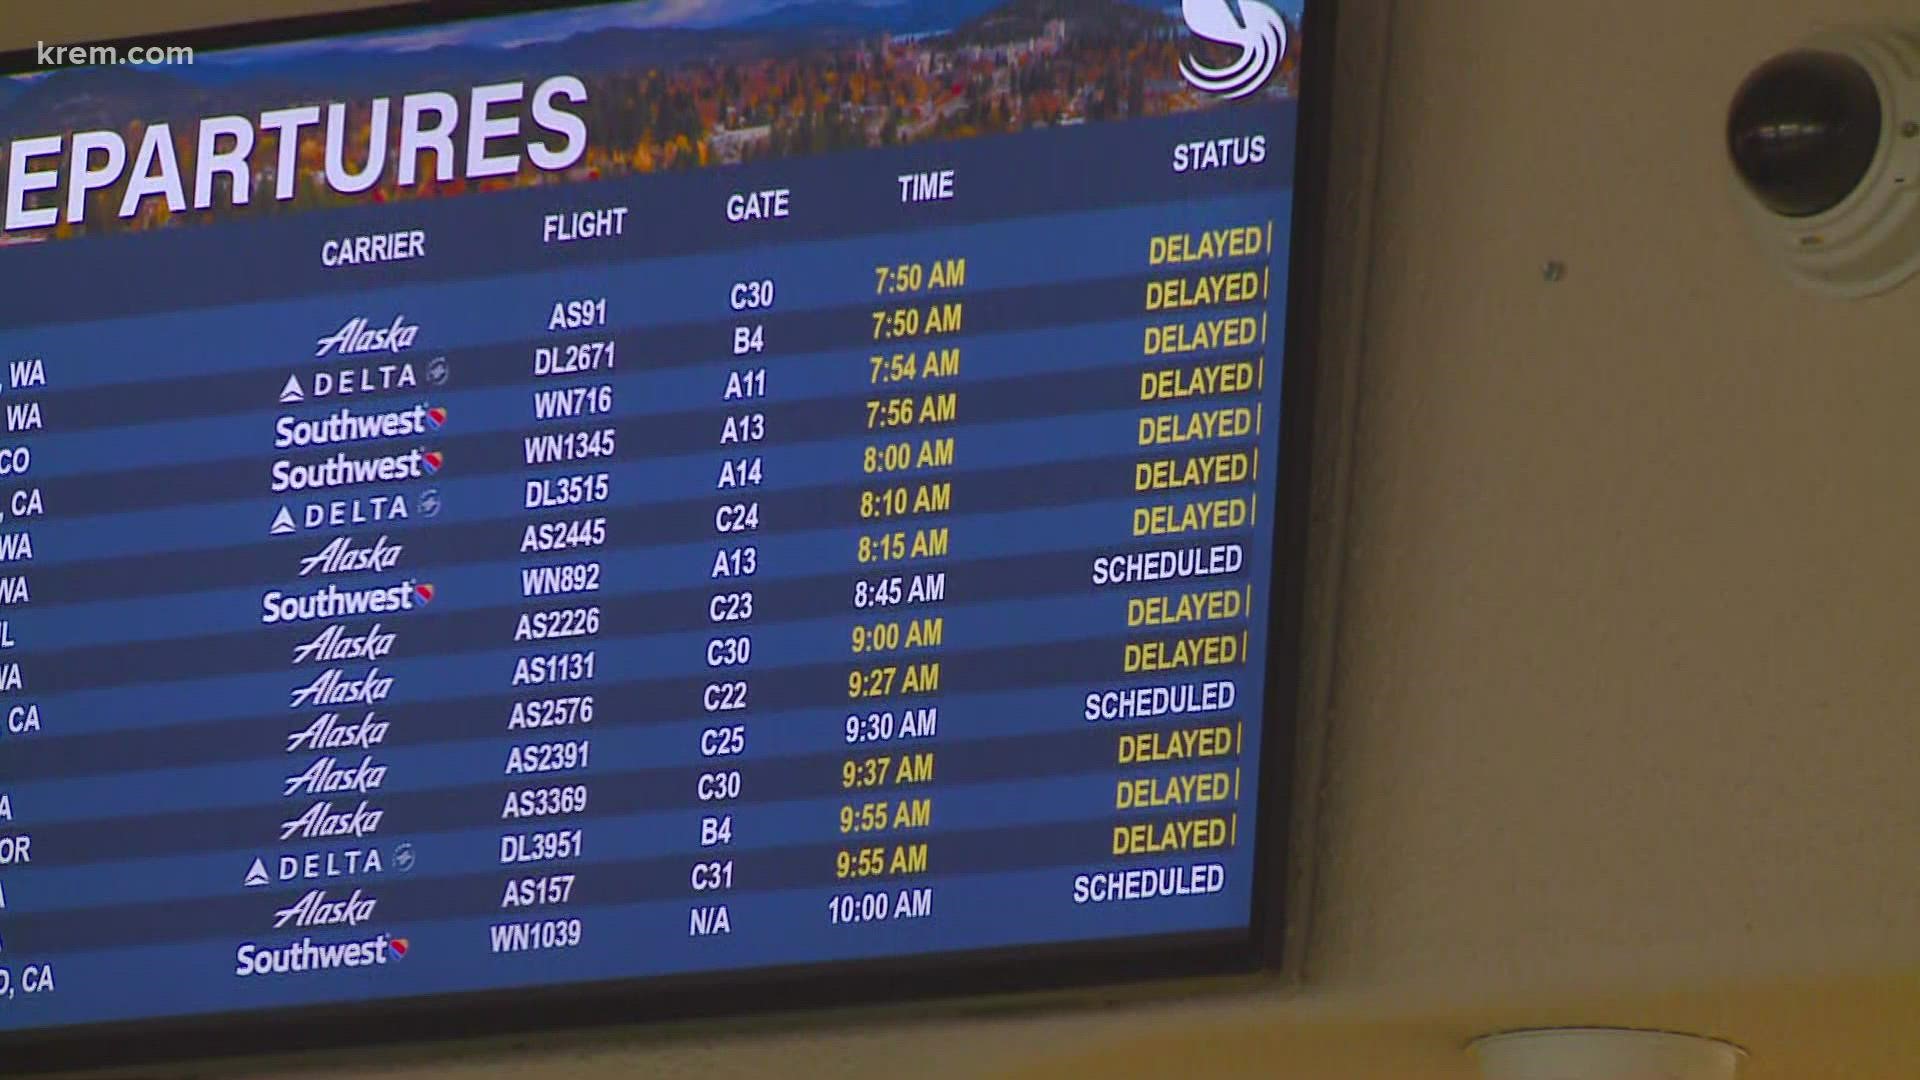 Alaska airline confirmed delayed flights are due to fog Monday morning